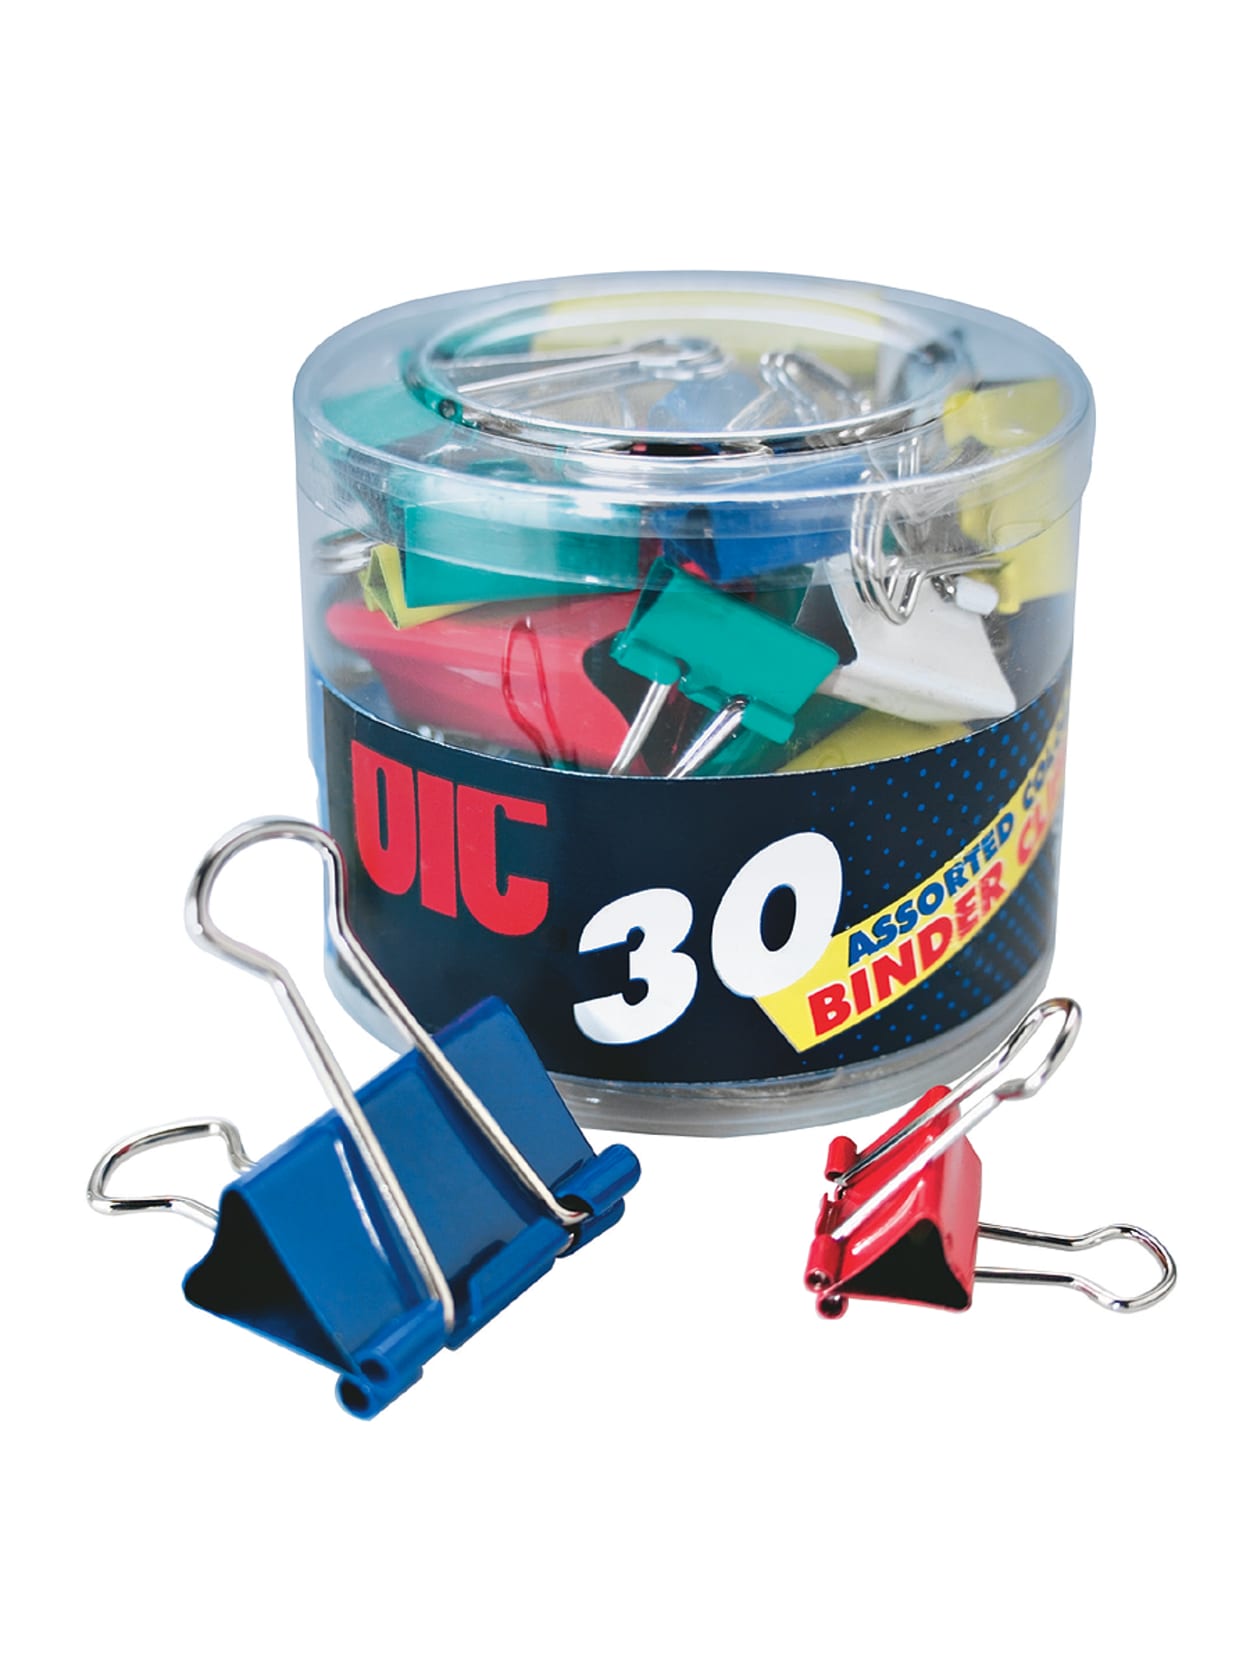 oic binder clips